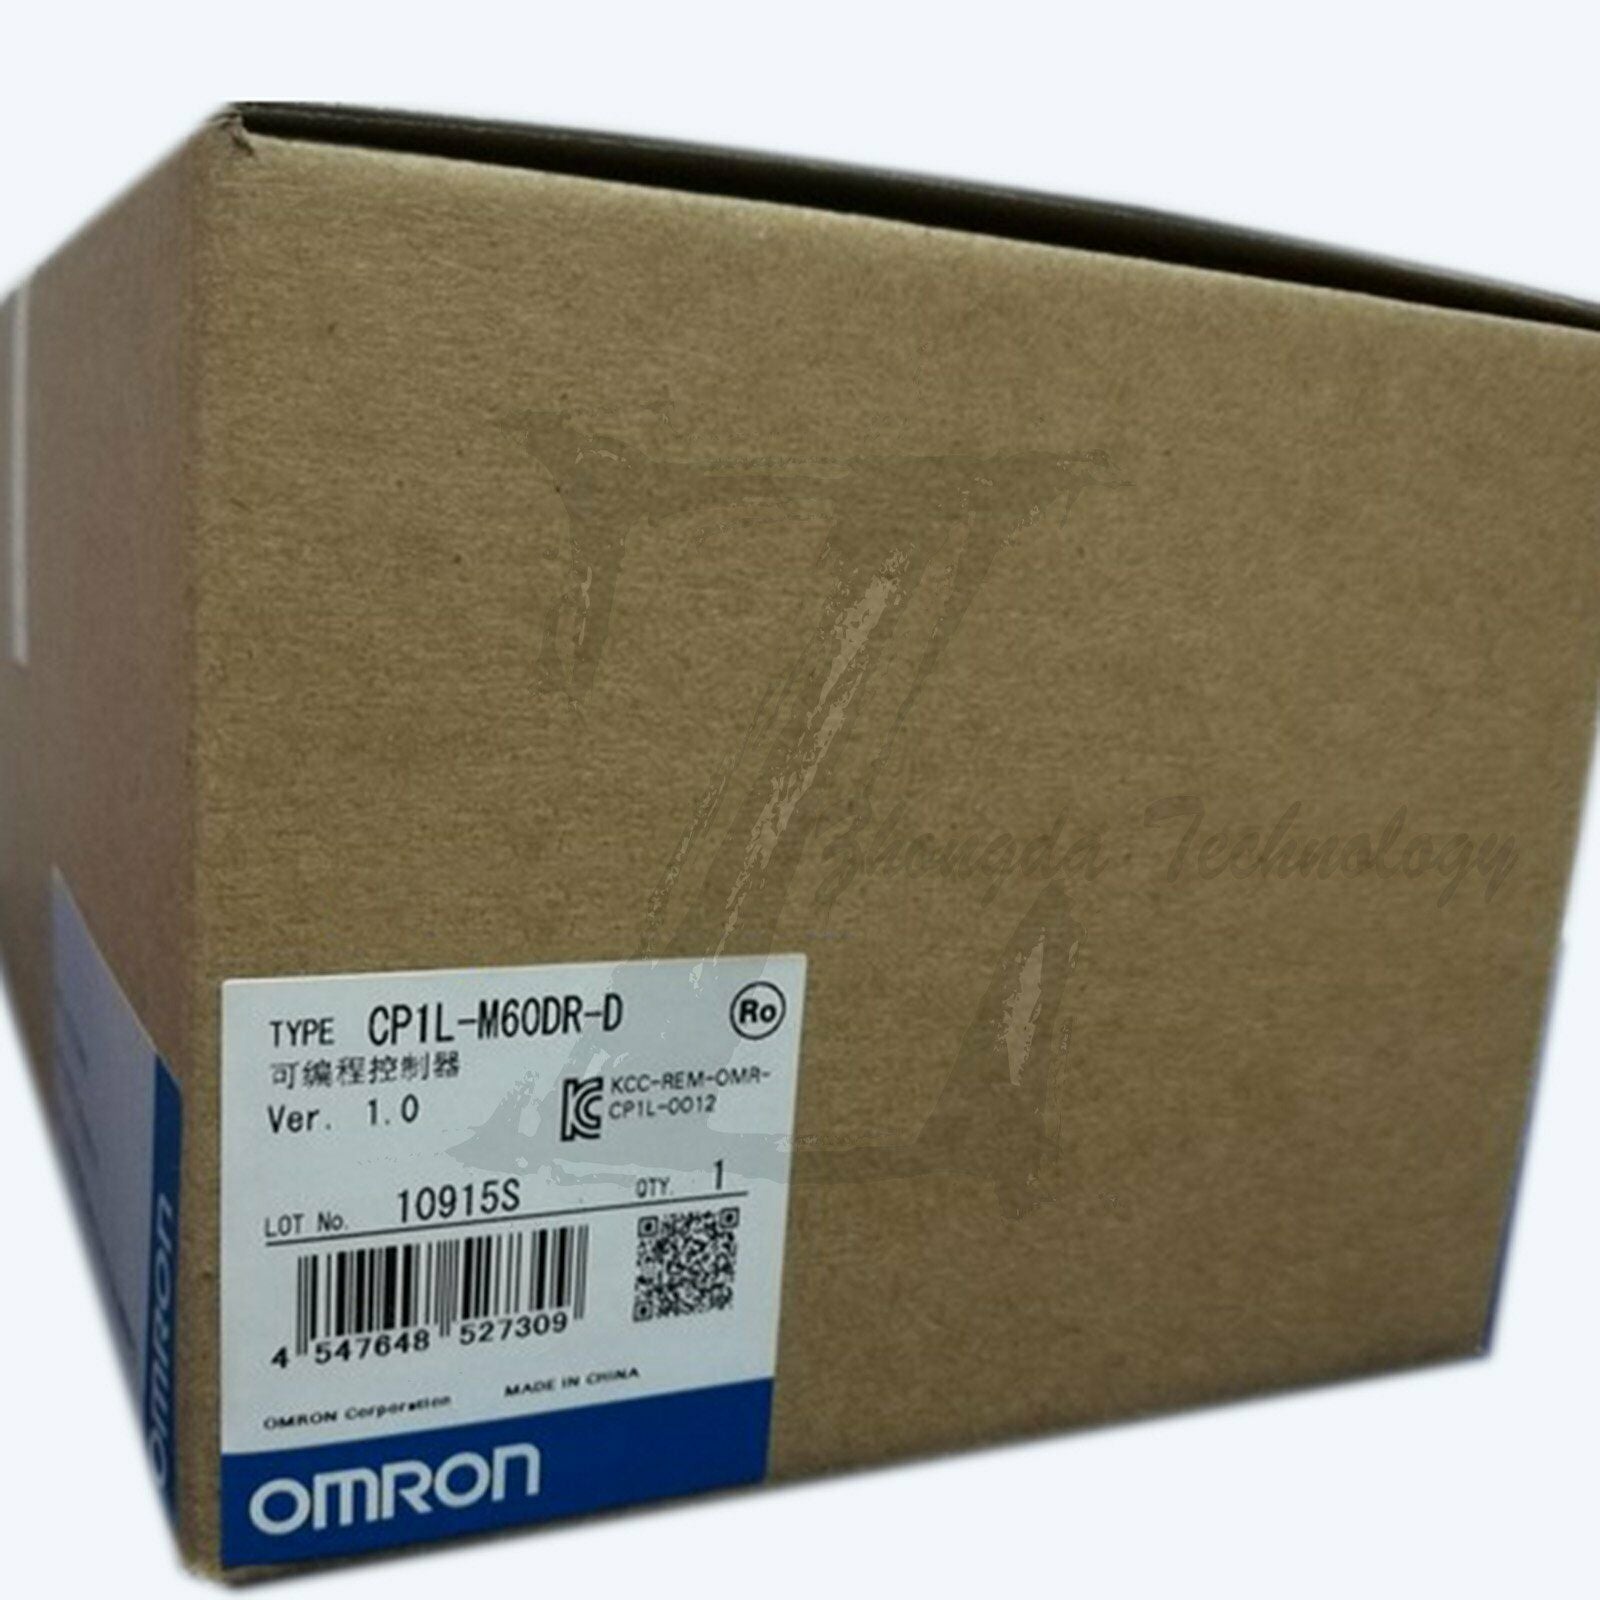 1pc new Omron CP1L-M60DR-D module one year warranty KOEED 201-500, 80%, import_2020_10_10_031751, Omron, Other